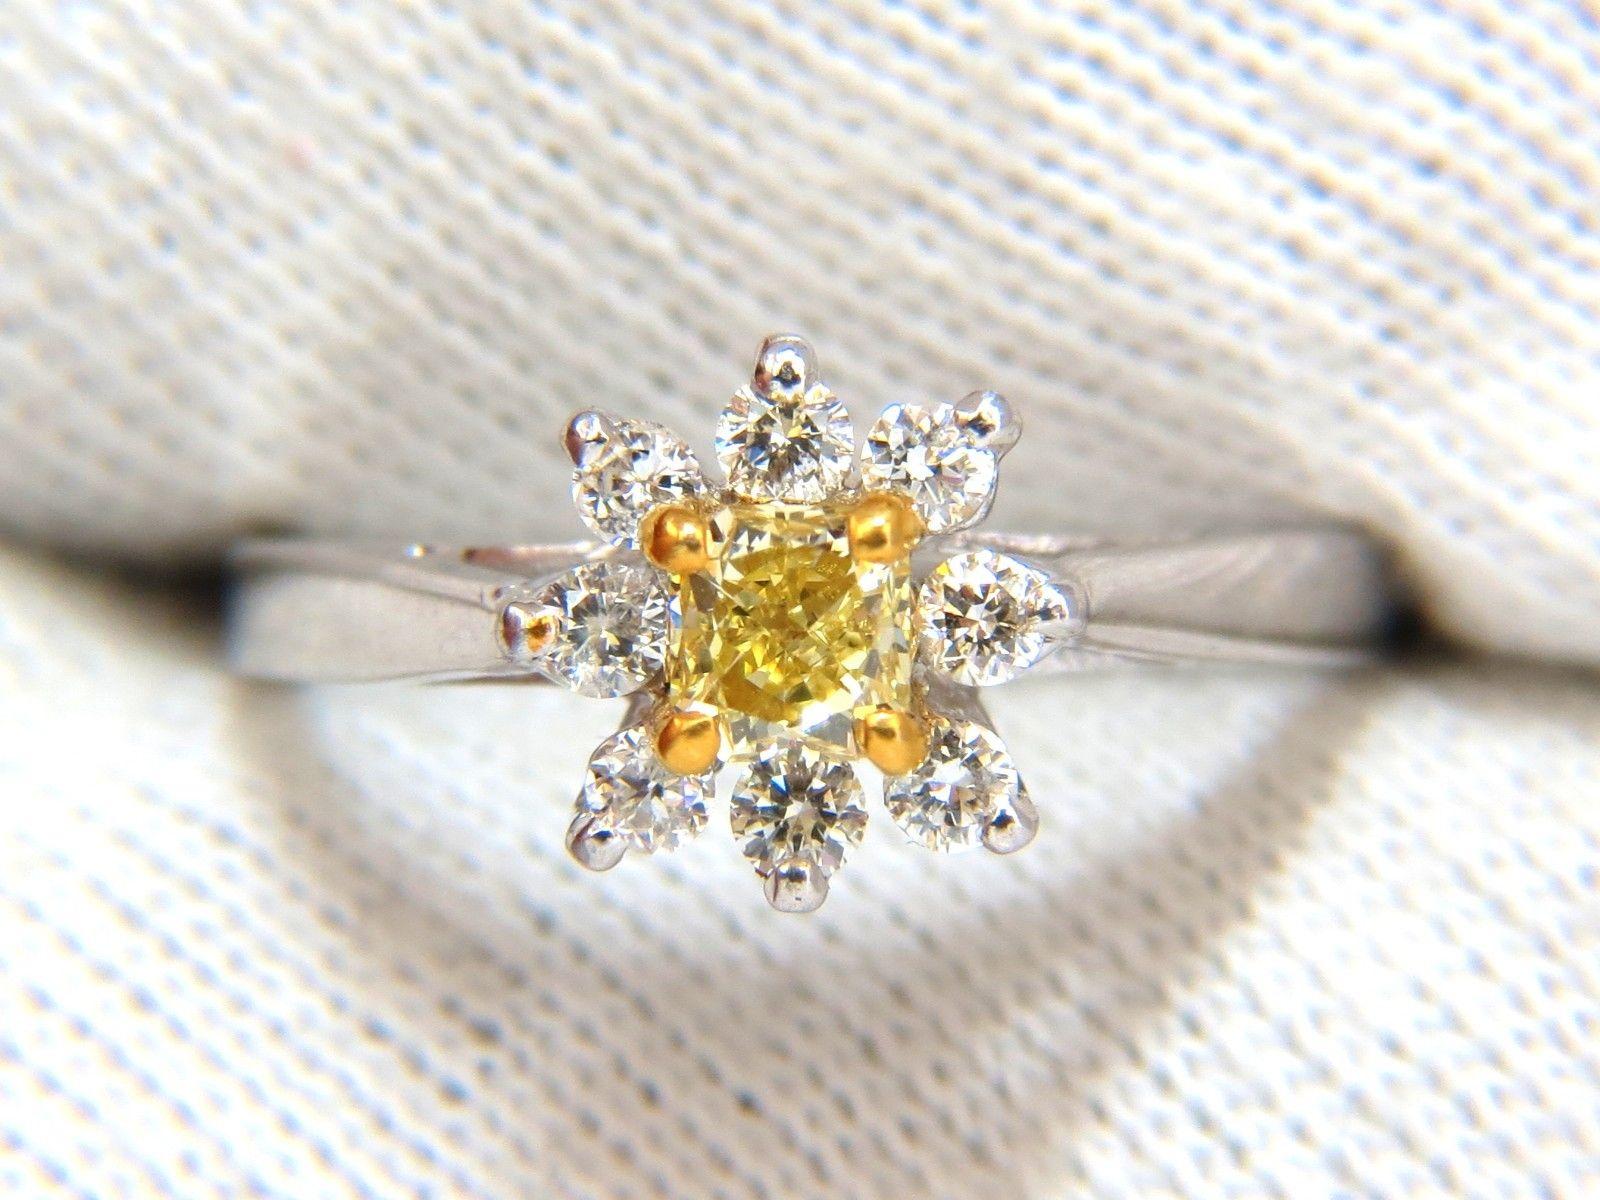 Fancy Yellow Cluster Ring

Petite Deco

.40ct. Natural Yellow Diamond

Princess Cut

Si-1 clarity

3.7 X 3.6mm



Side diamonds:

.20ct.

rounds, Full cuts.

H-color Si-1 clarity

  14kt. white gold

2.2 grams

Ring Current size: 6 

(Free Resize